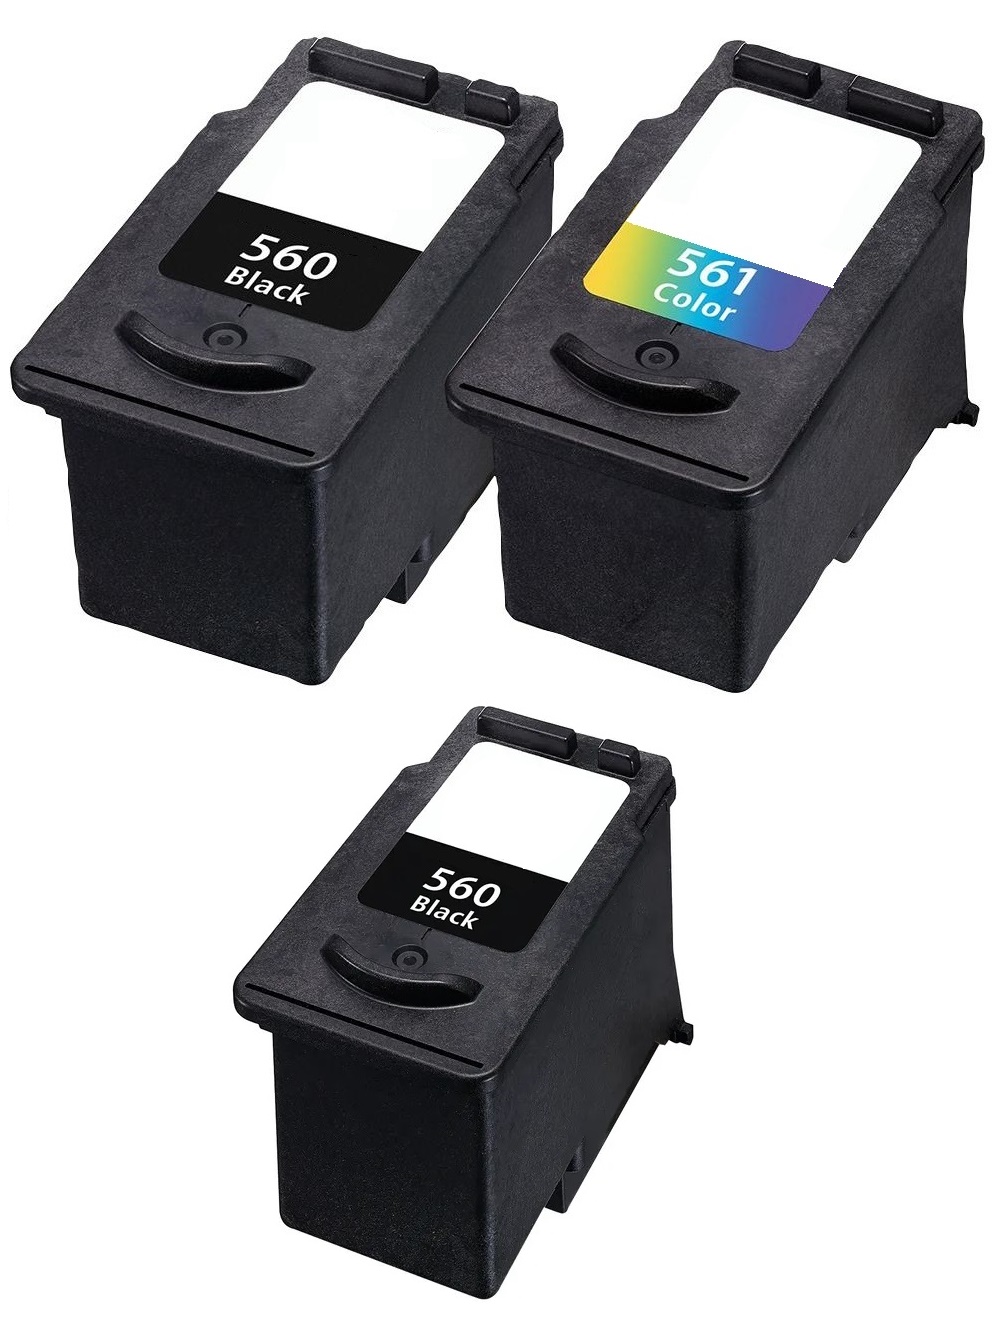 Remanufactured Canon PG-560 and CL-561 Black and Colour High Cap. Ink Cartridges & EXTRA BLACK